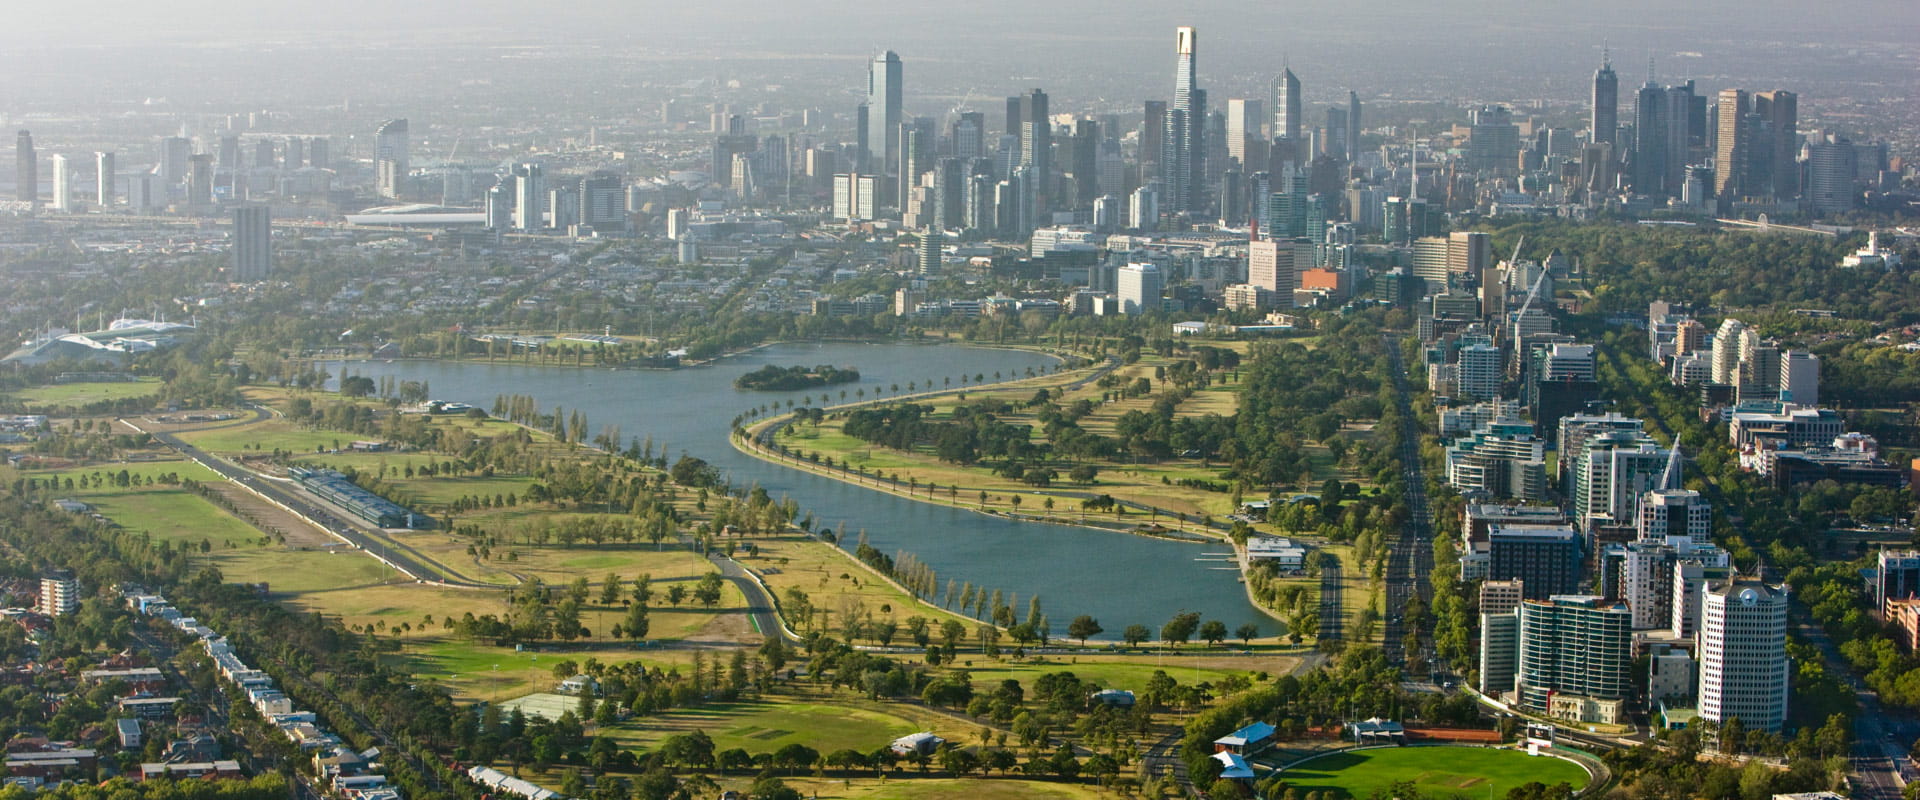 Aerial view of Albert Park lake lined by trees with the Melbourne city skyline in the background.